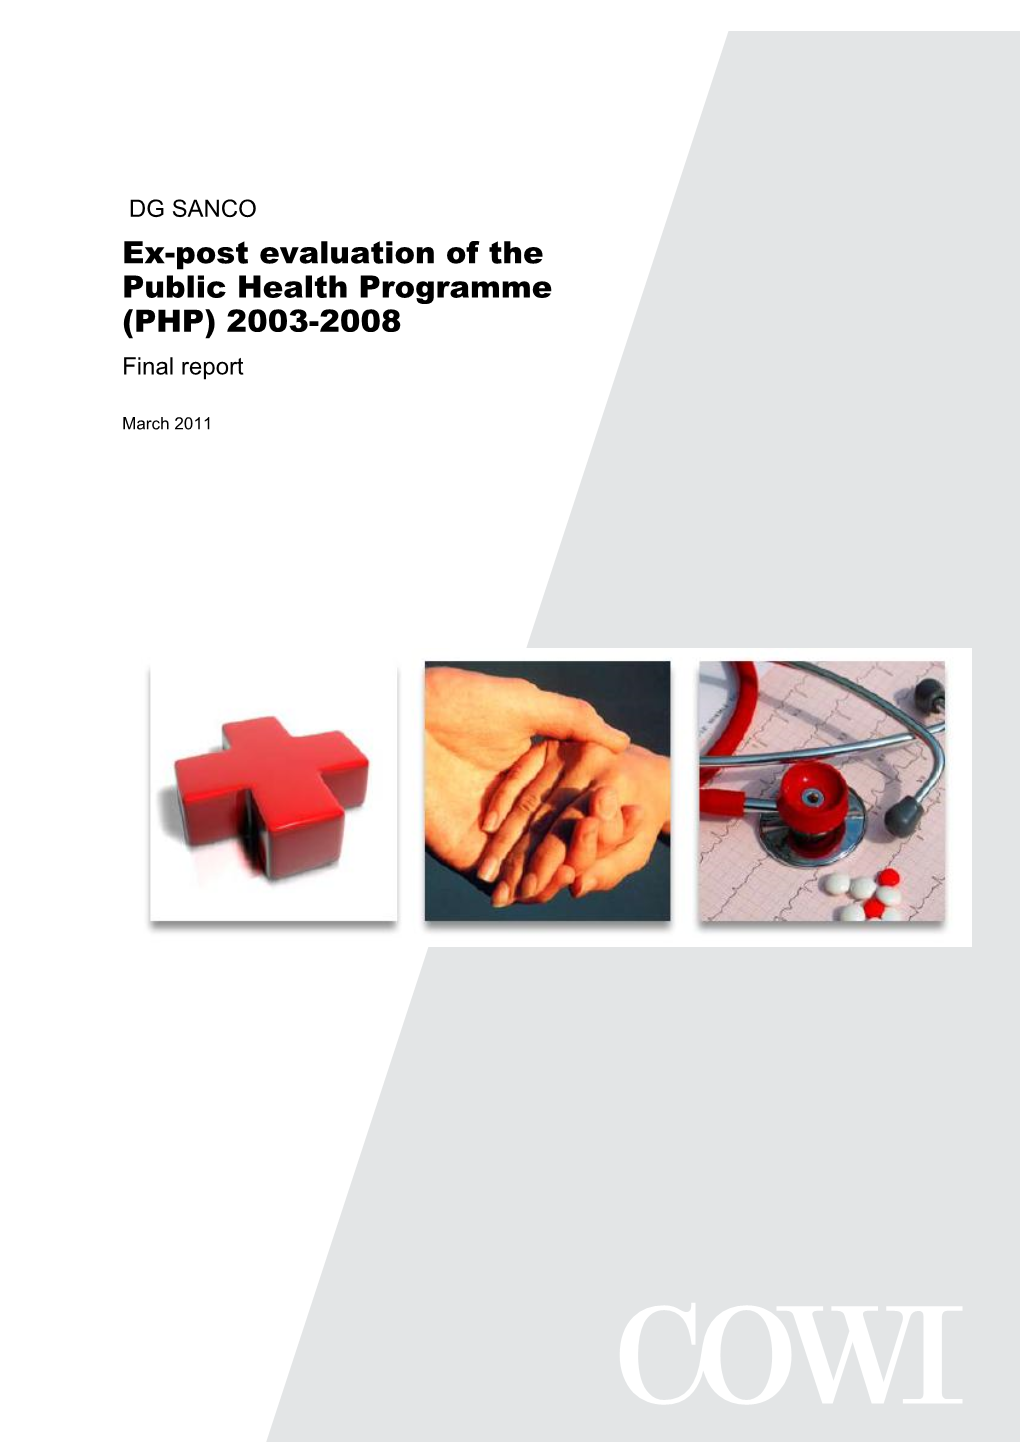 Ex-Post Evaluation of the Public Health Programme (PHP) 2003-2008 Final Report